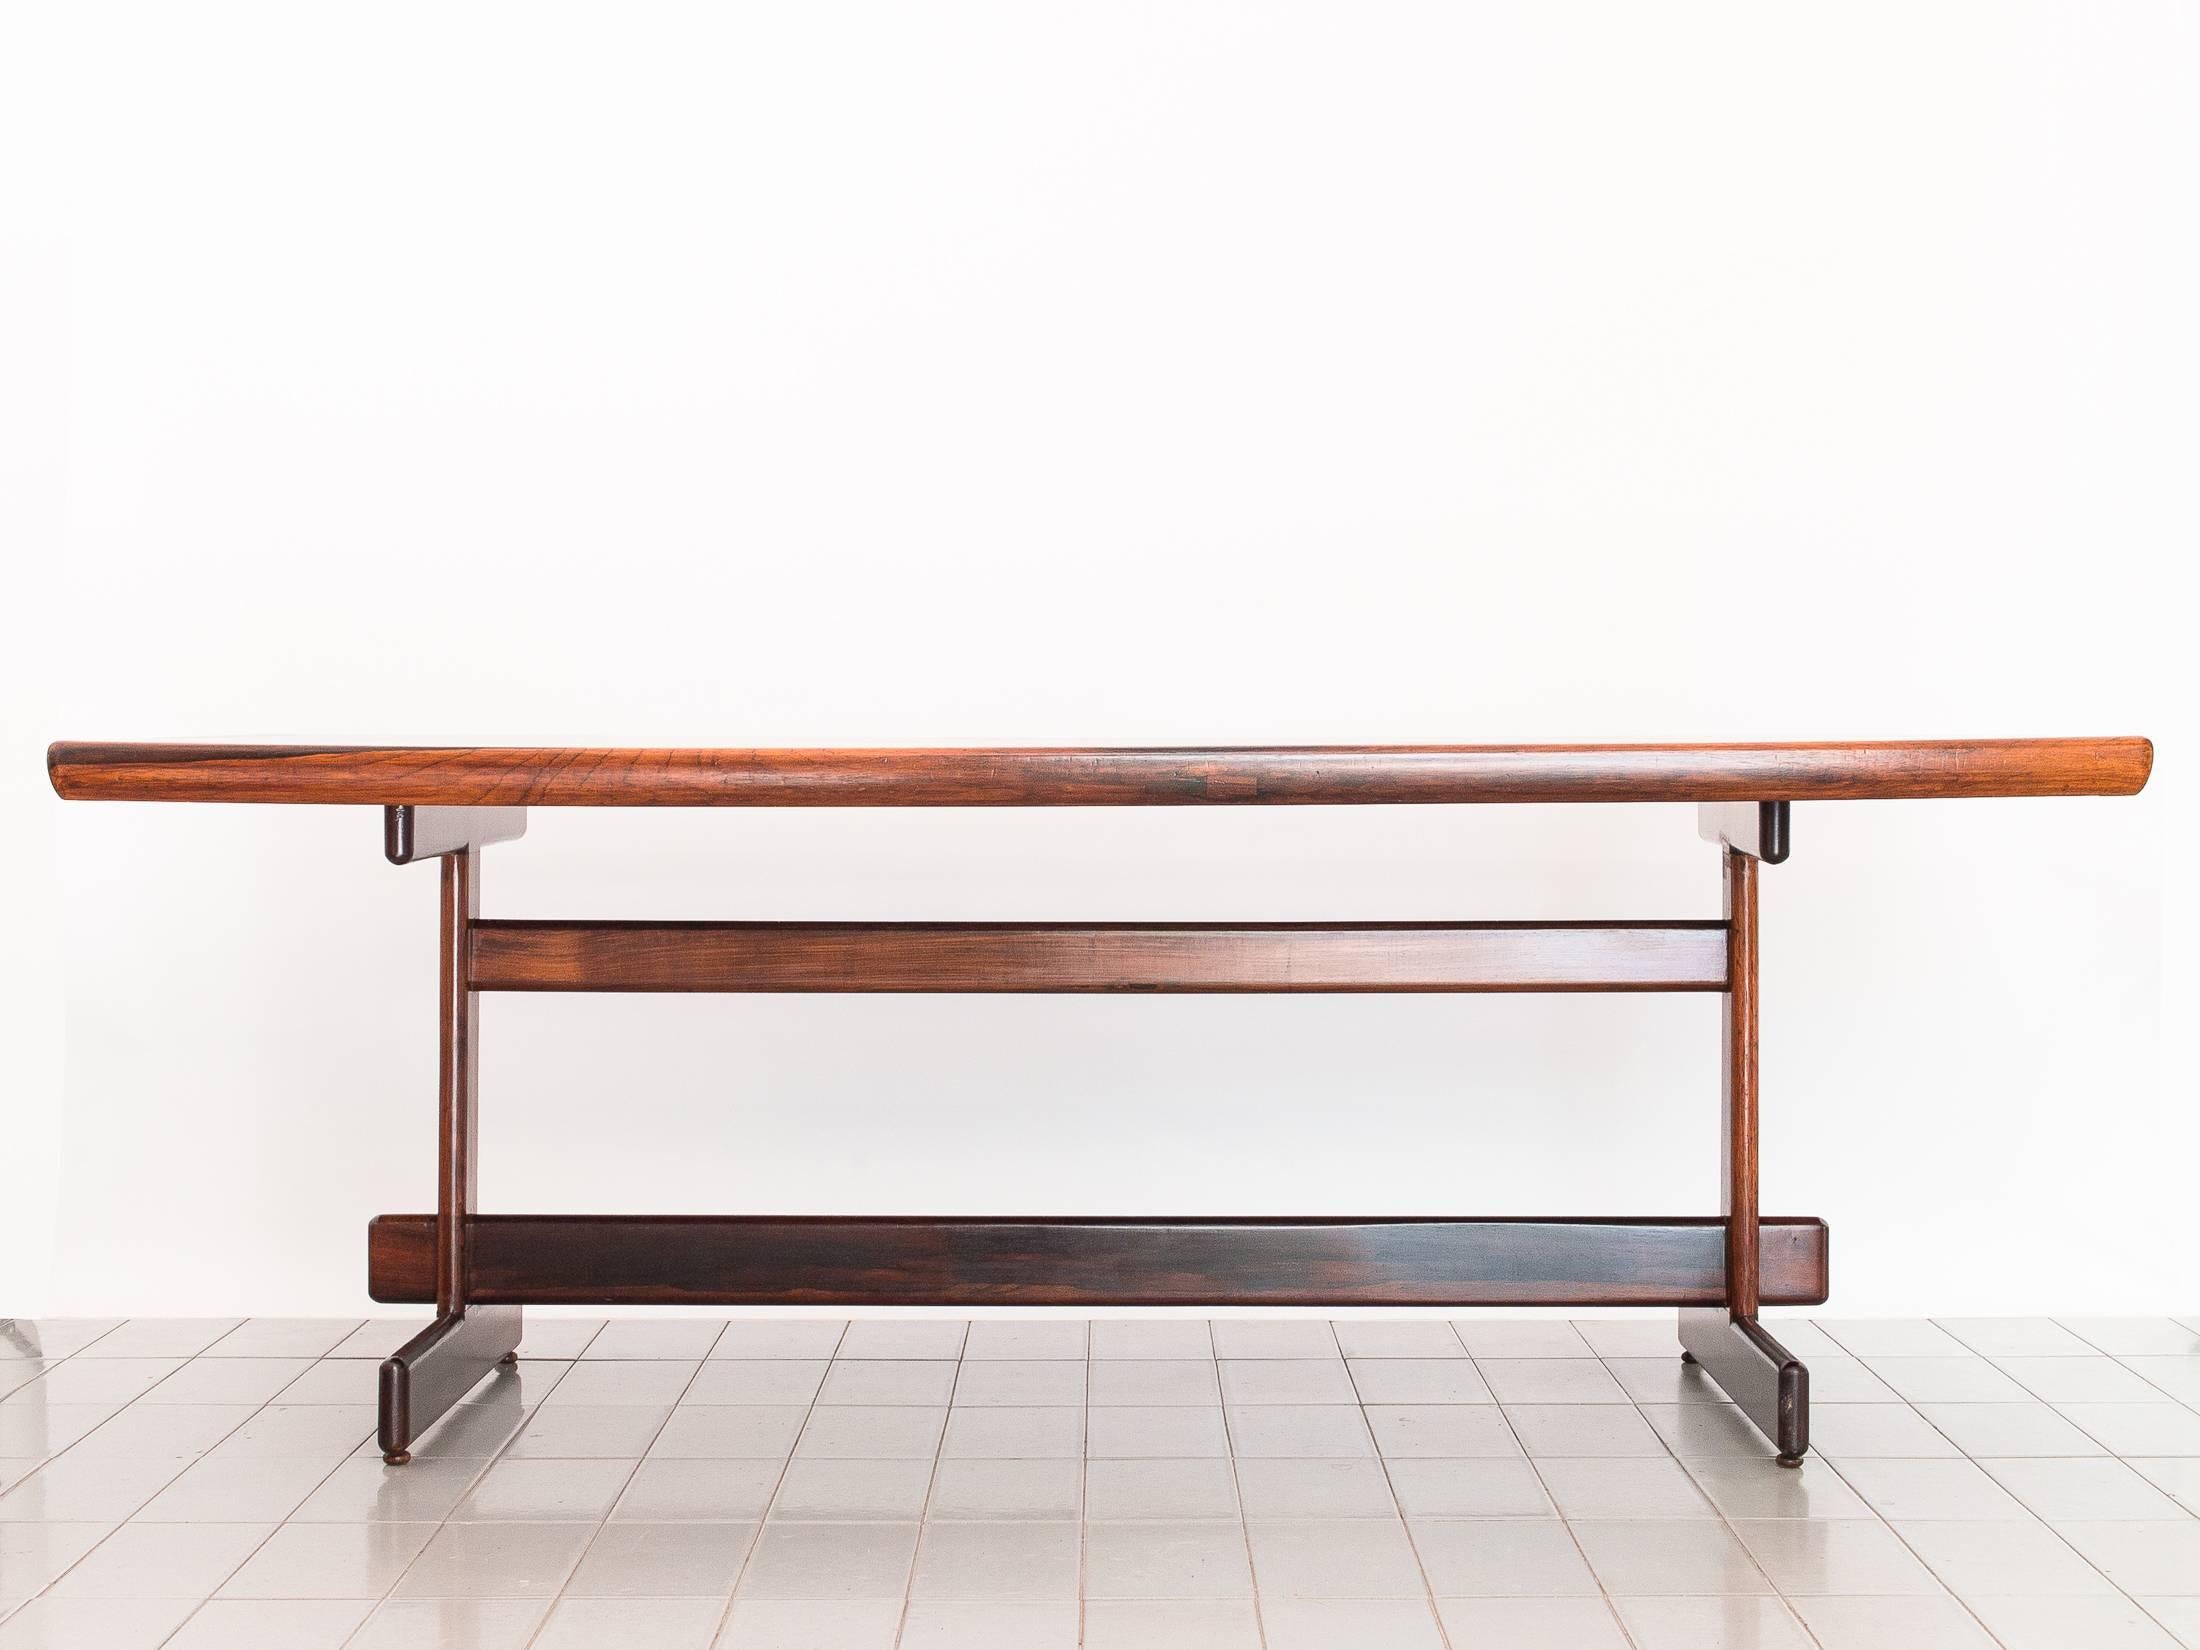 Beautiful rosewood dining table, designed by Sergio Rodrigues in the early 1960s. Feet, legs and stretcher are solid rosewood, top is veneered with solid beveled edges. Fully restored and refinished. Fits eight chairs comfortably.